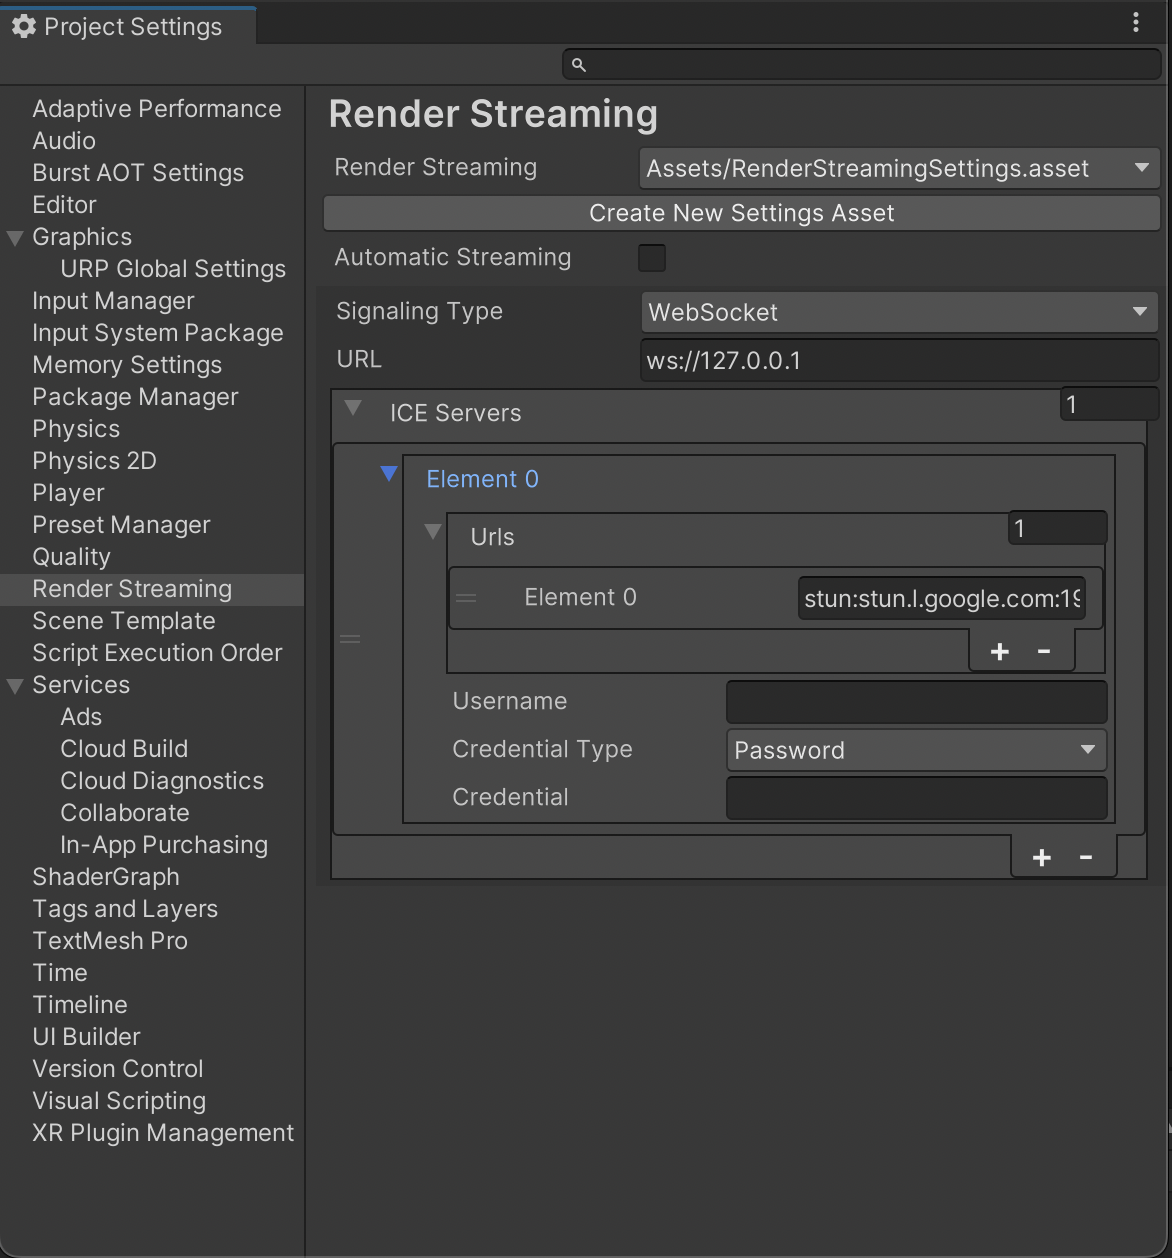 Render Streaming Project Settings